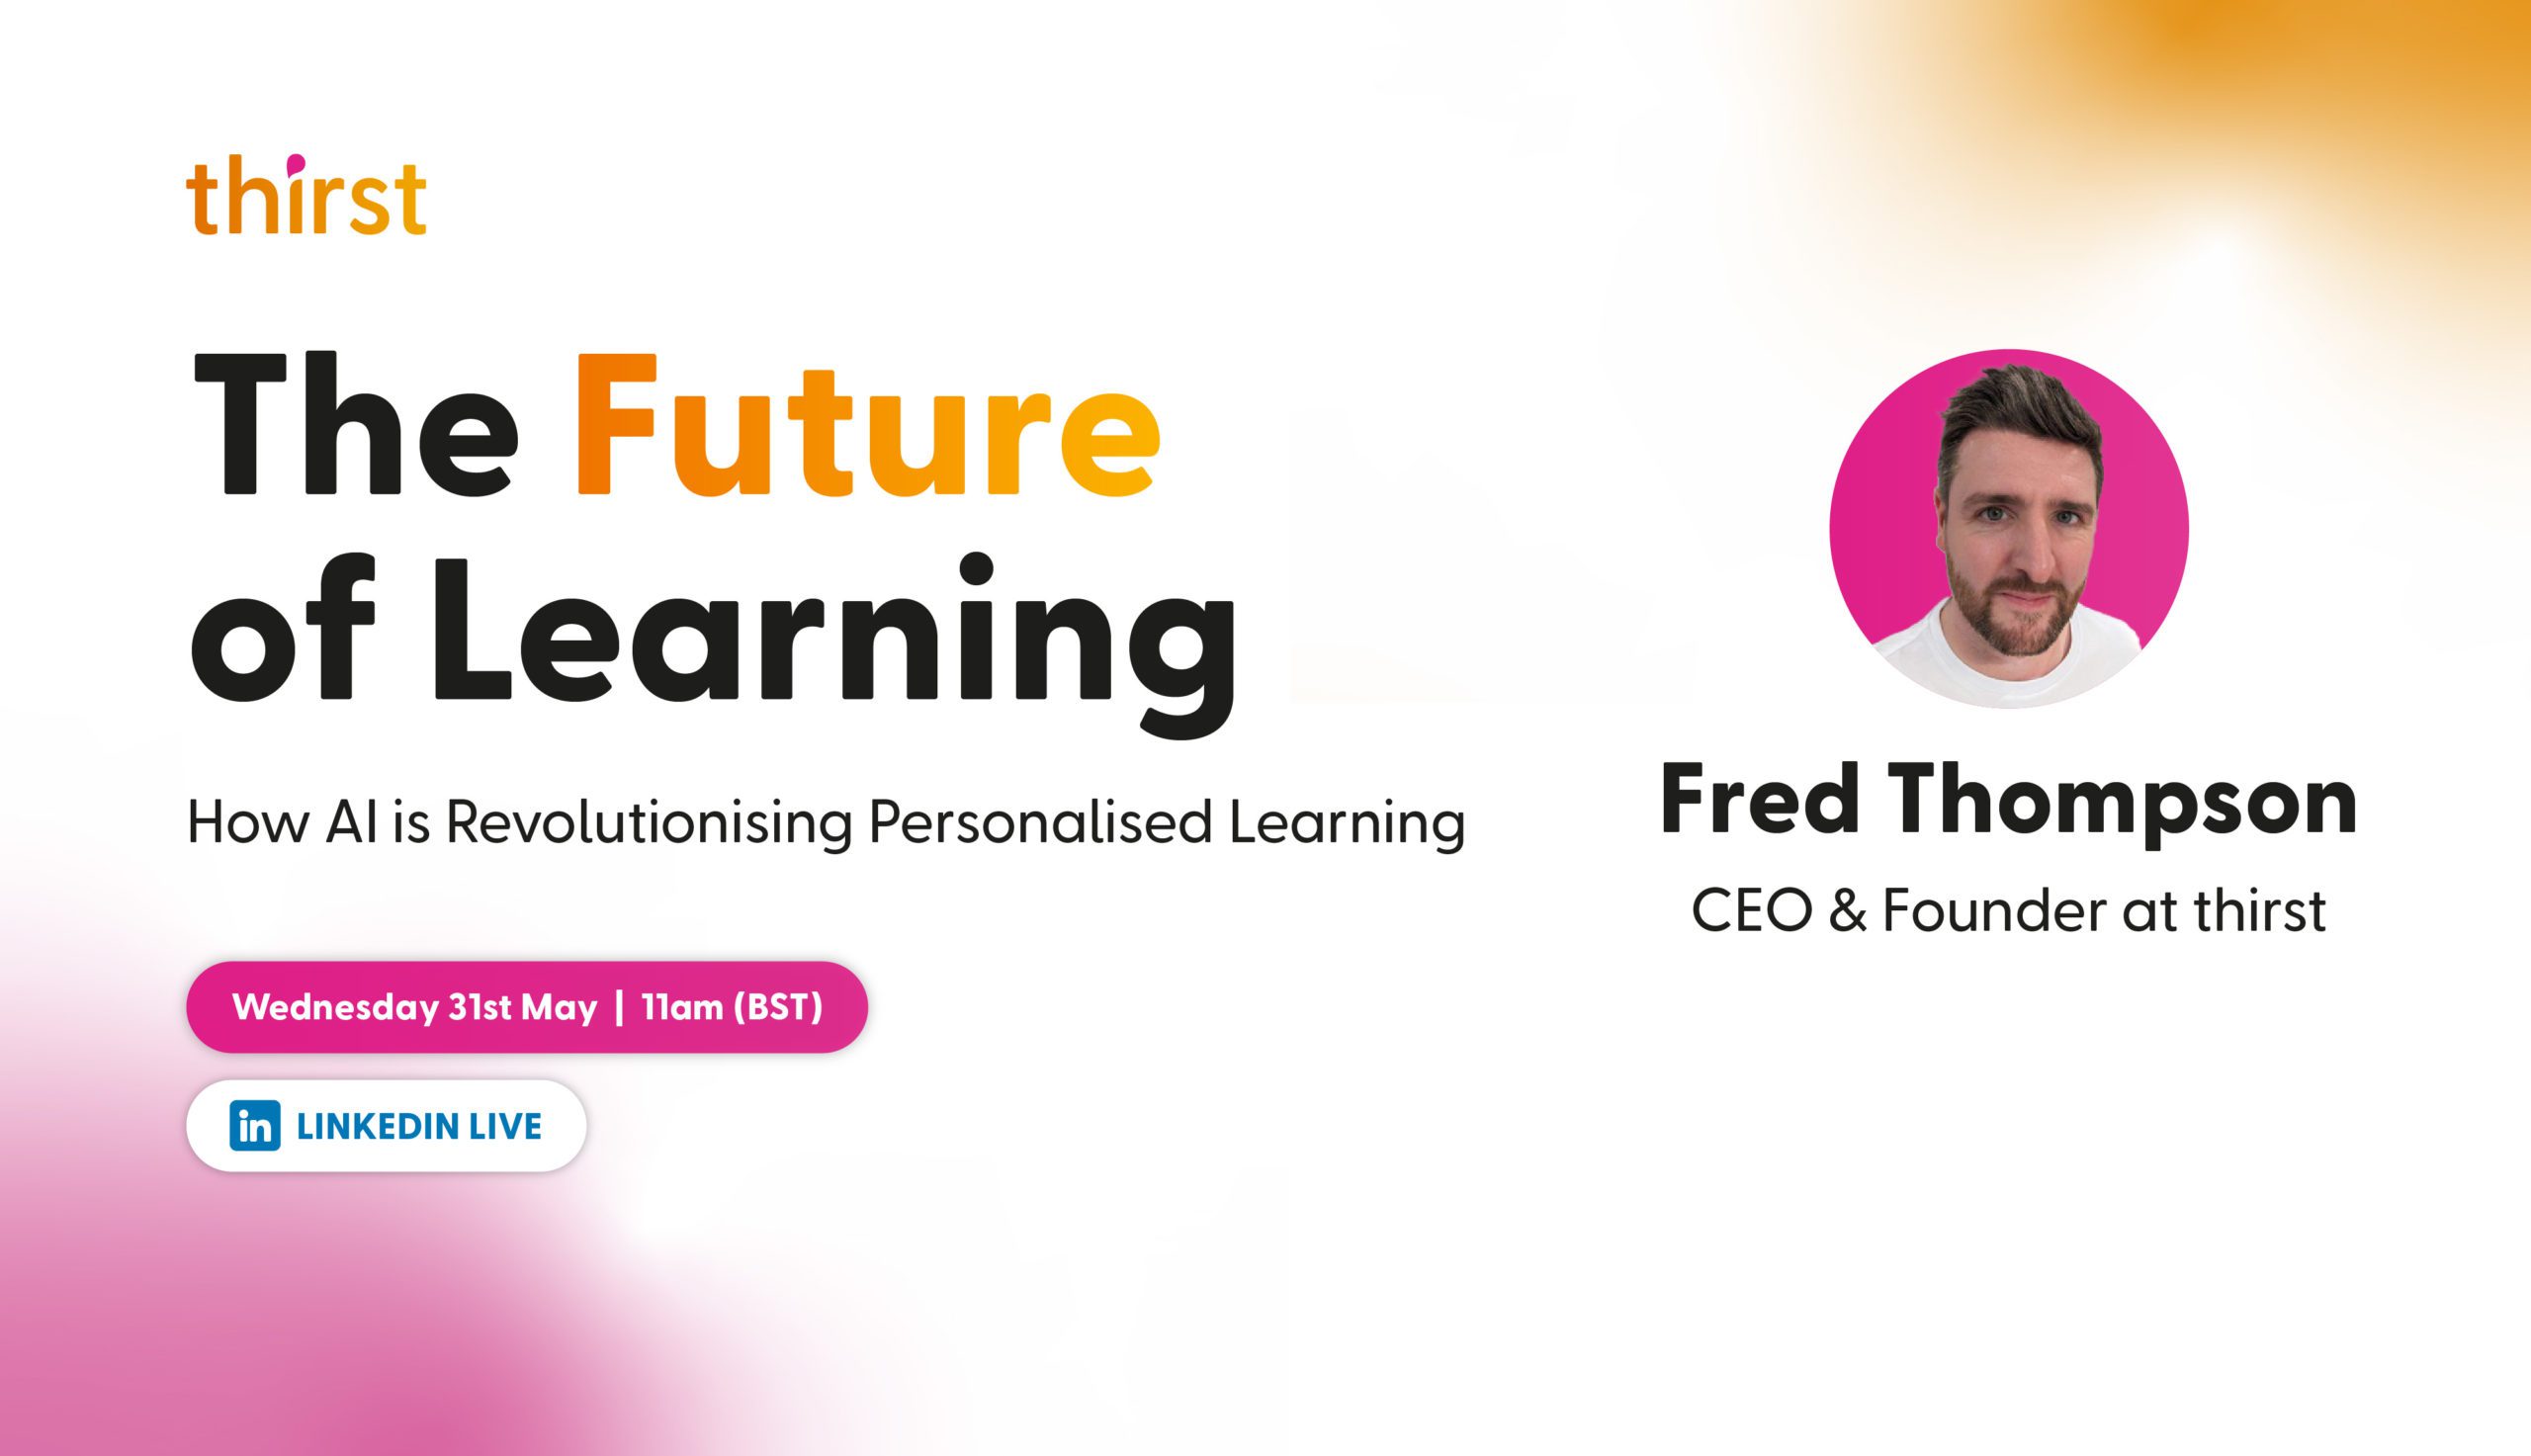 Fred Thompson - Linkedin Live Event - The Future of Learning: How AI is Revolutionising Personalised Learning